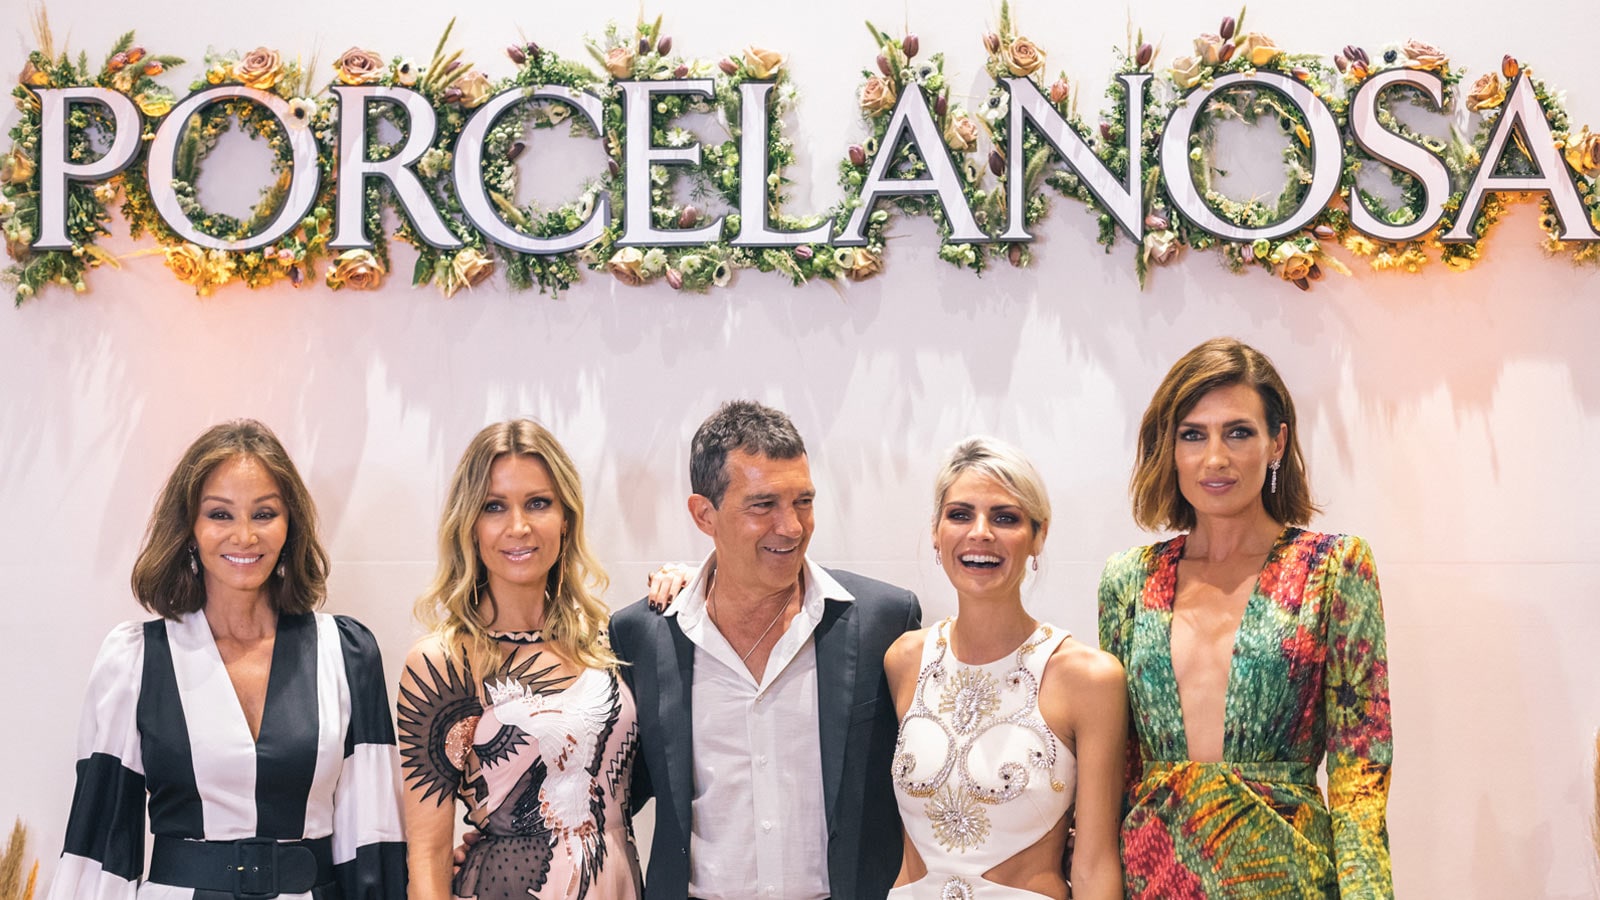 PORCELANOSA Grupo opens its newly renovated showroom in Miami